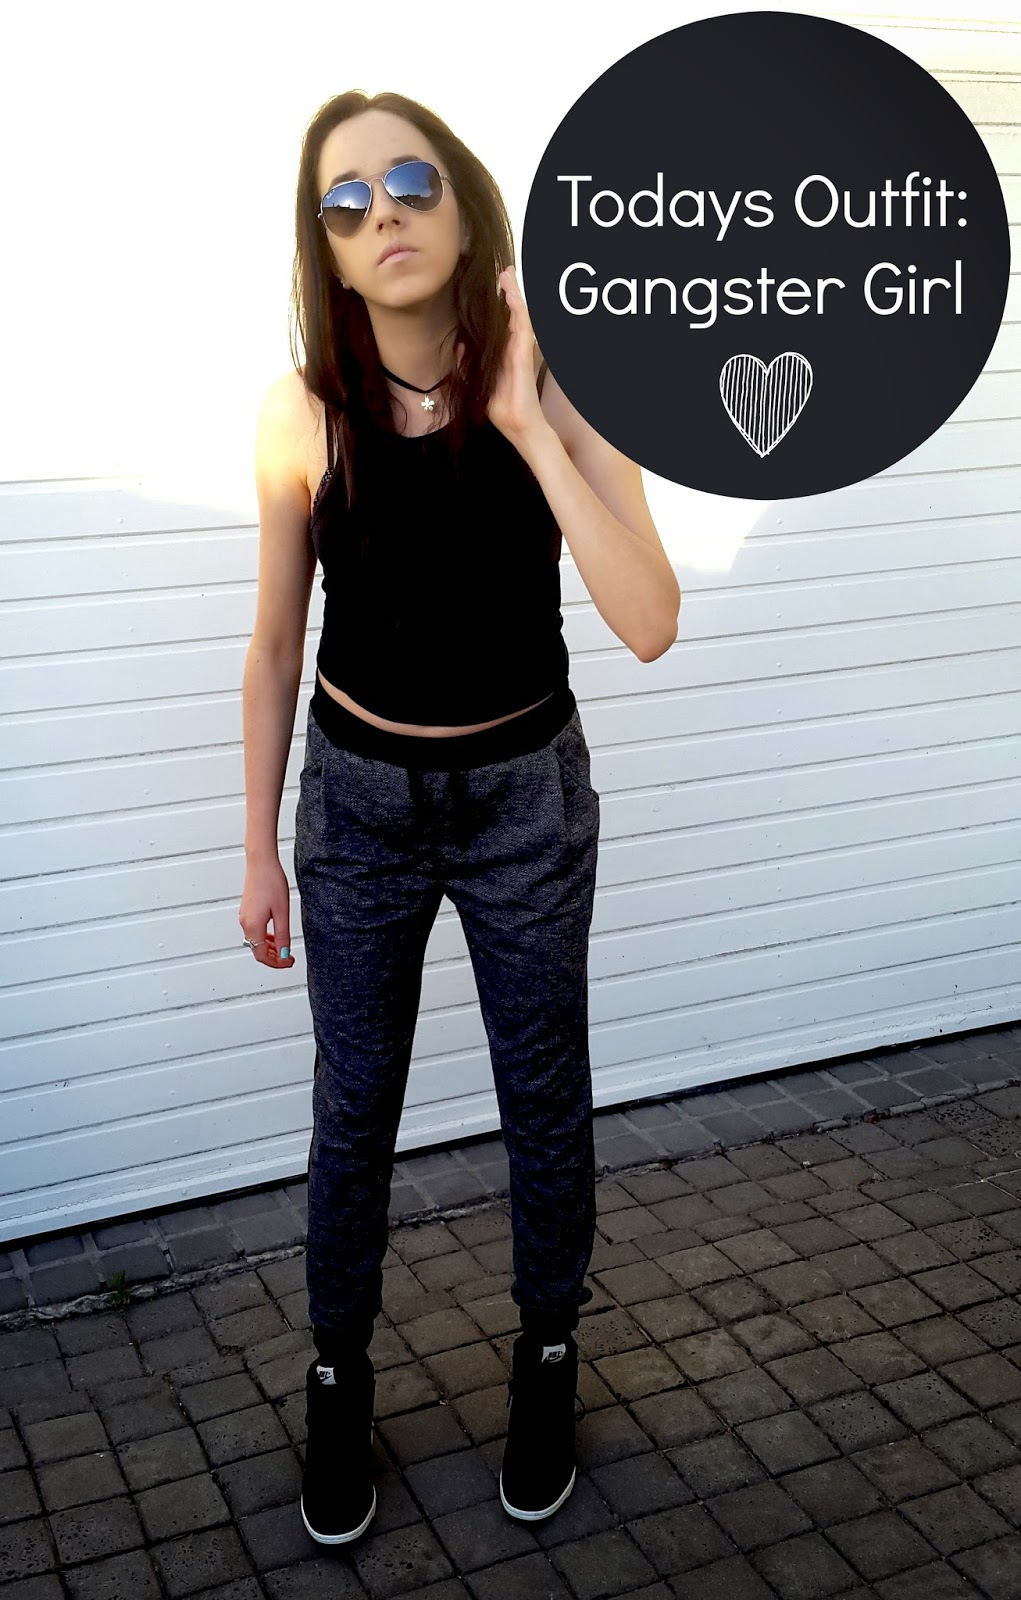 Pabrica Dot .: Outfit of the day: Gangster Girl